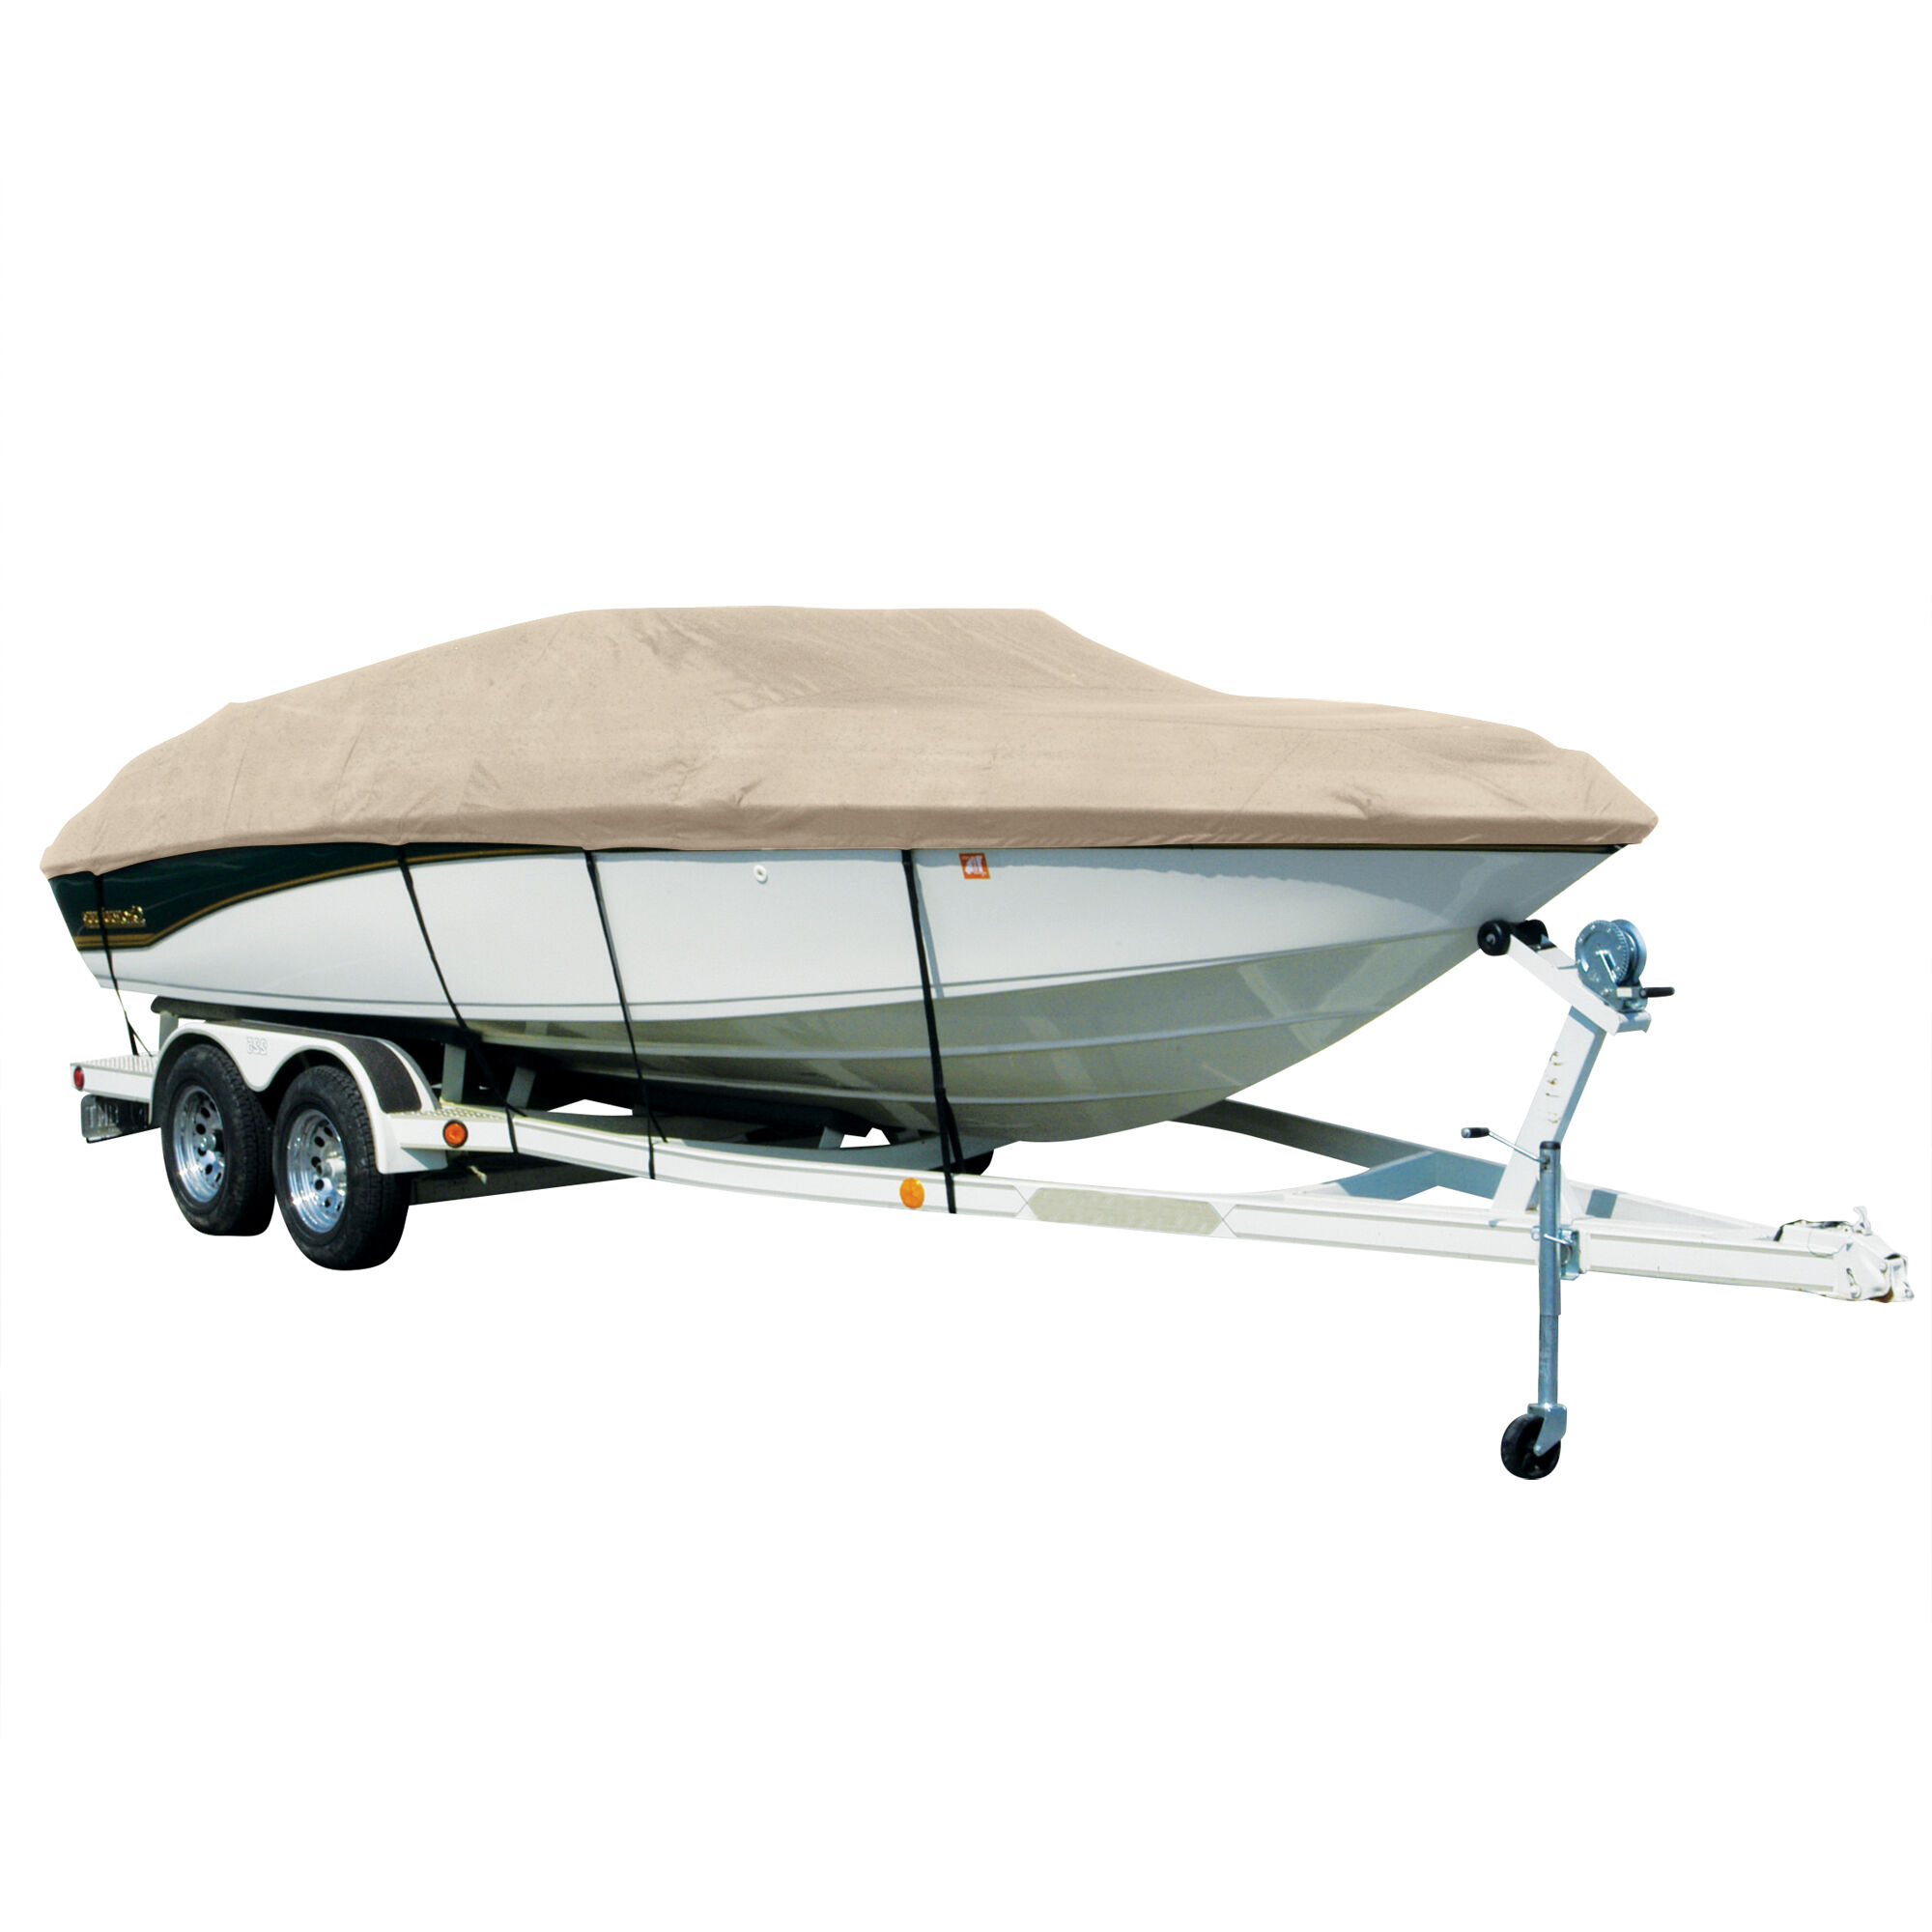 Covermate Exact Fit Sharkskin Boat Cover For SEA RAY 250 CC NO PULPIT in Linen